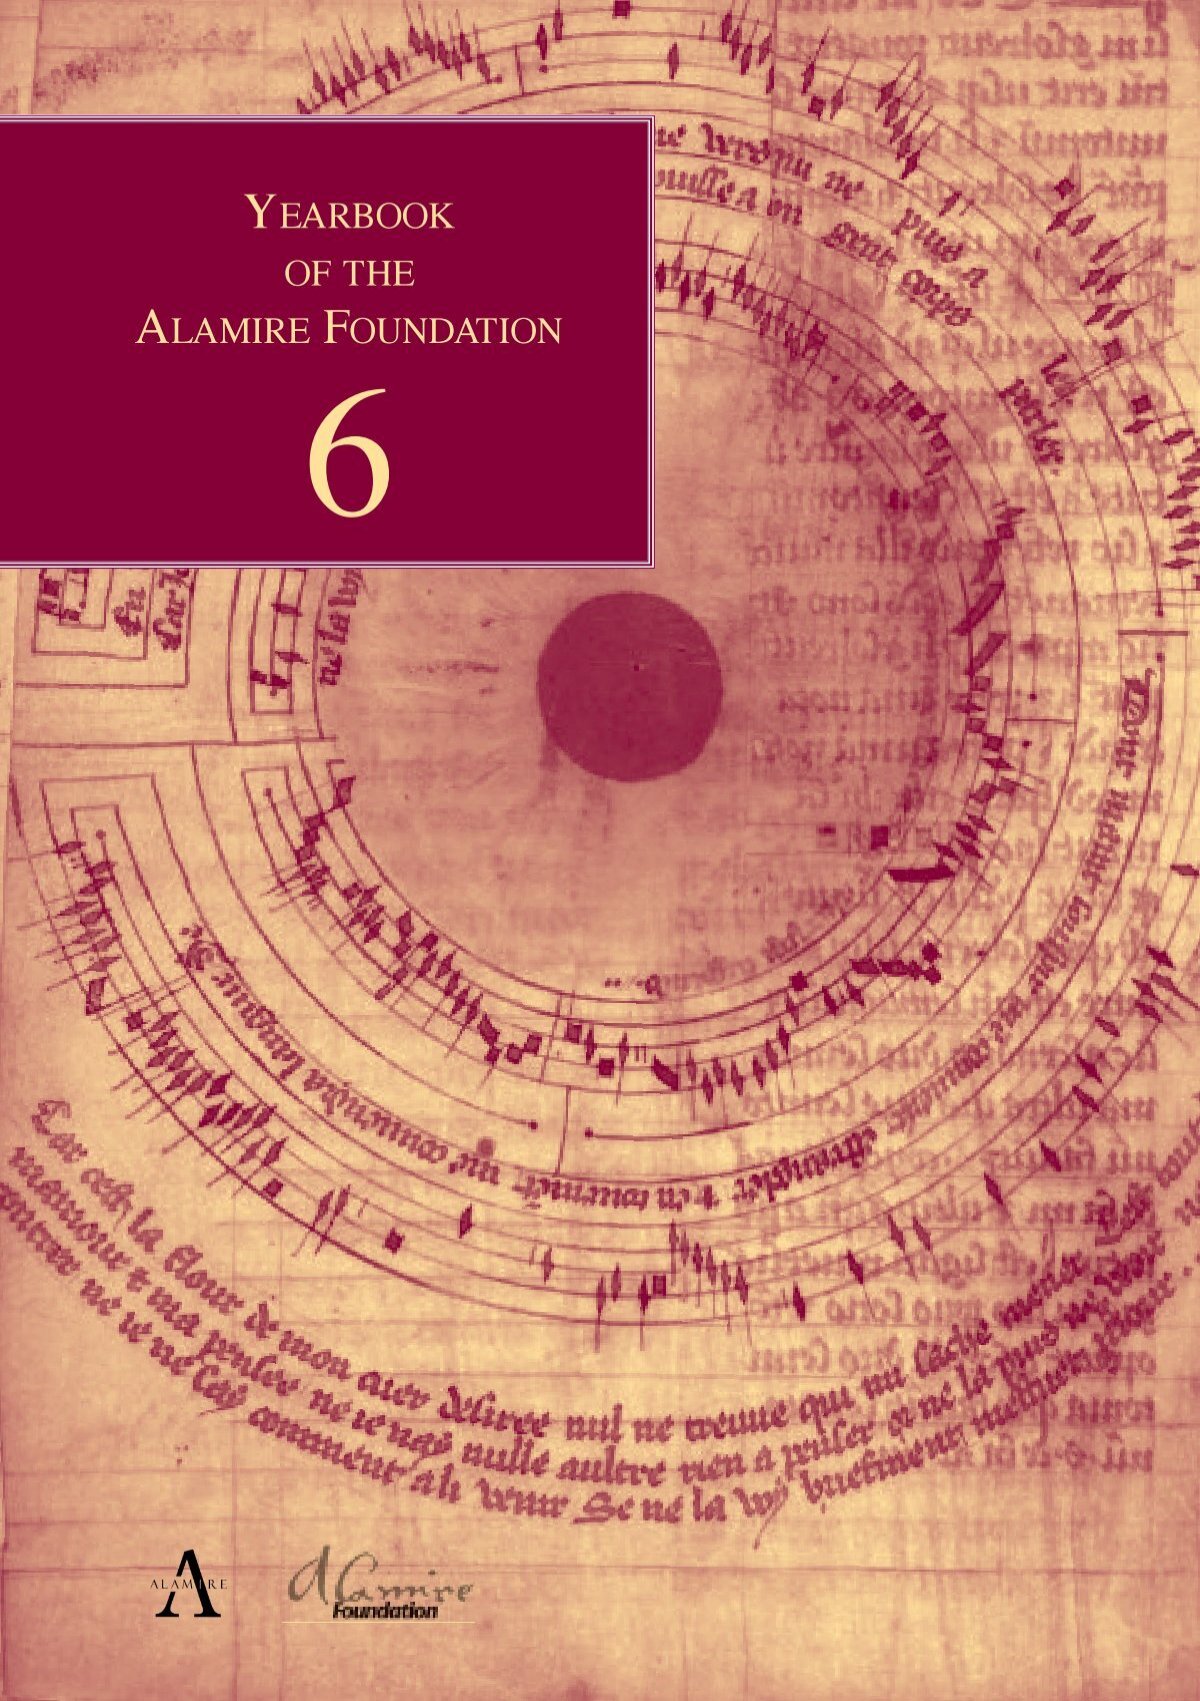 YEARBOOK OF THE ALAMIRE FOUNDATION